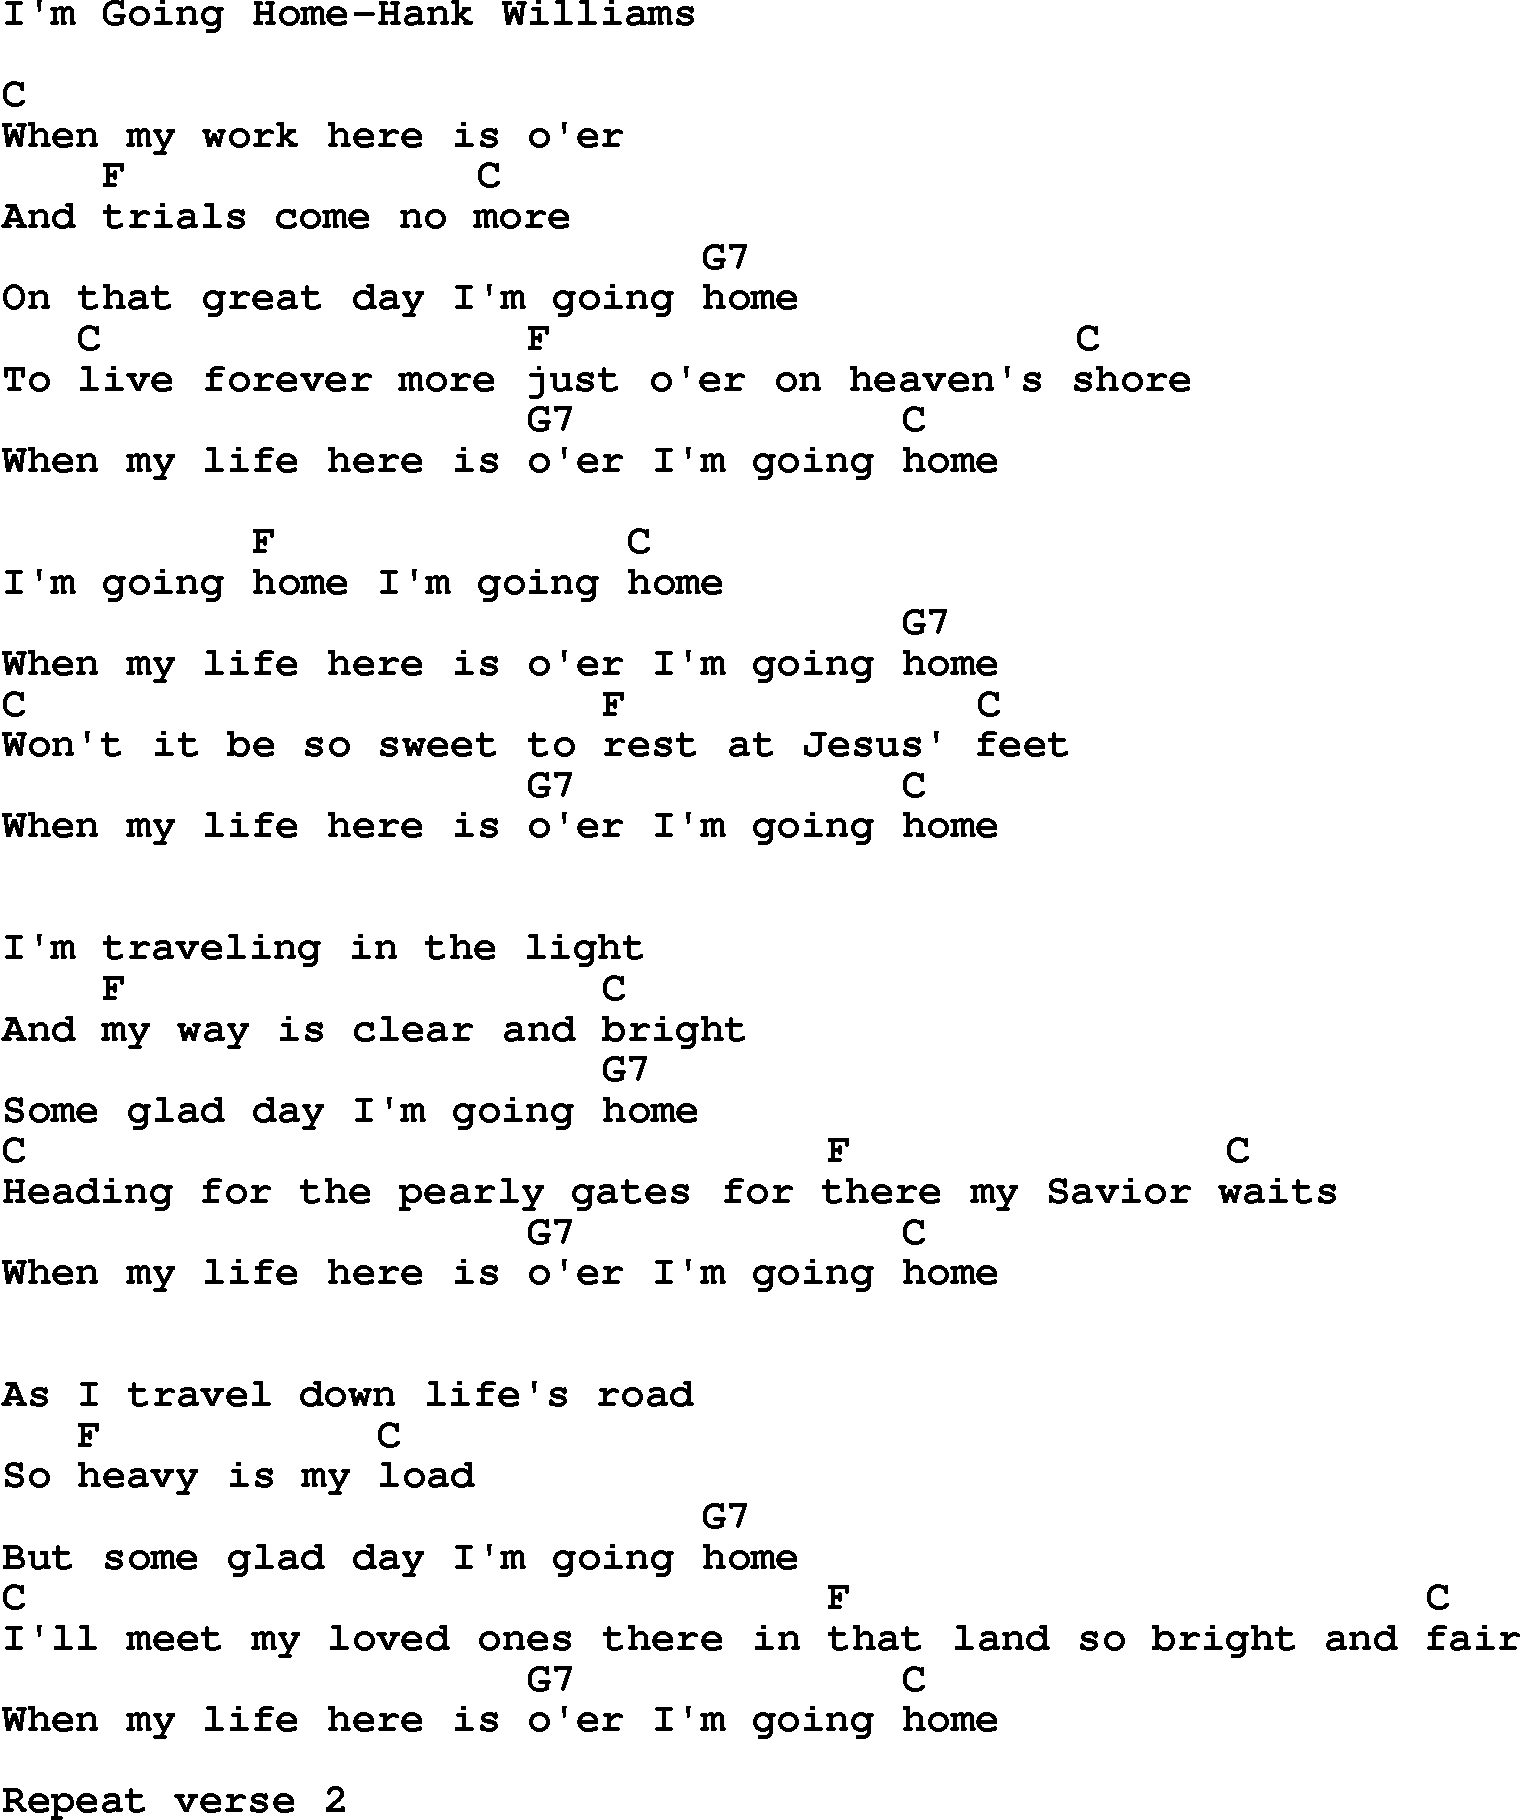 Country, Southern and Bluegrass Gospel Song I'm Going Home-Hank Williams lyrics and chords